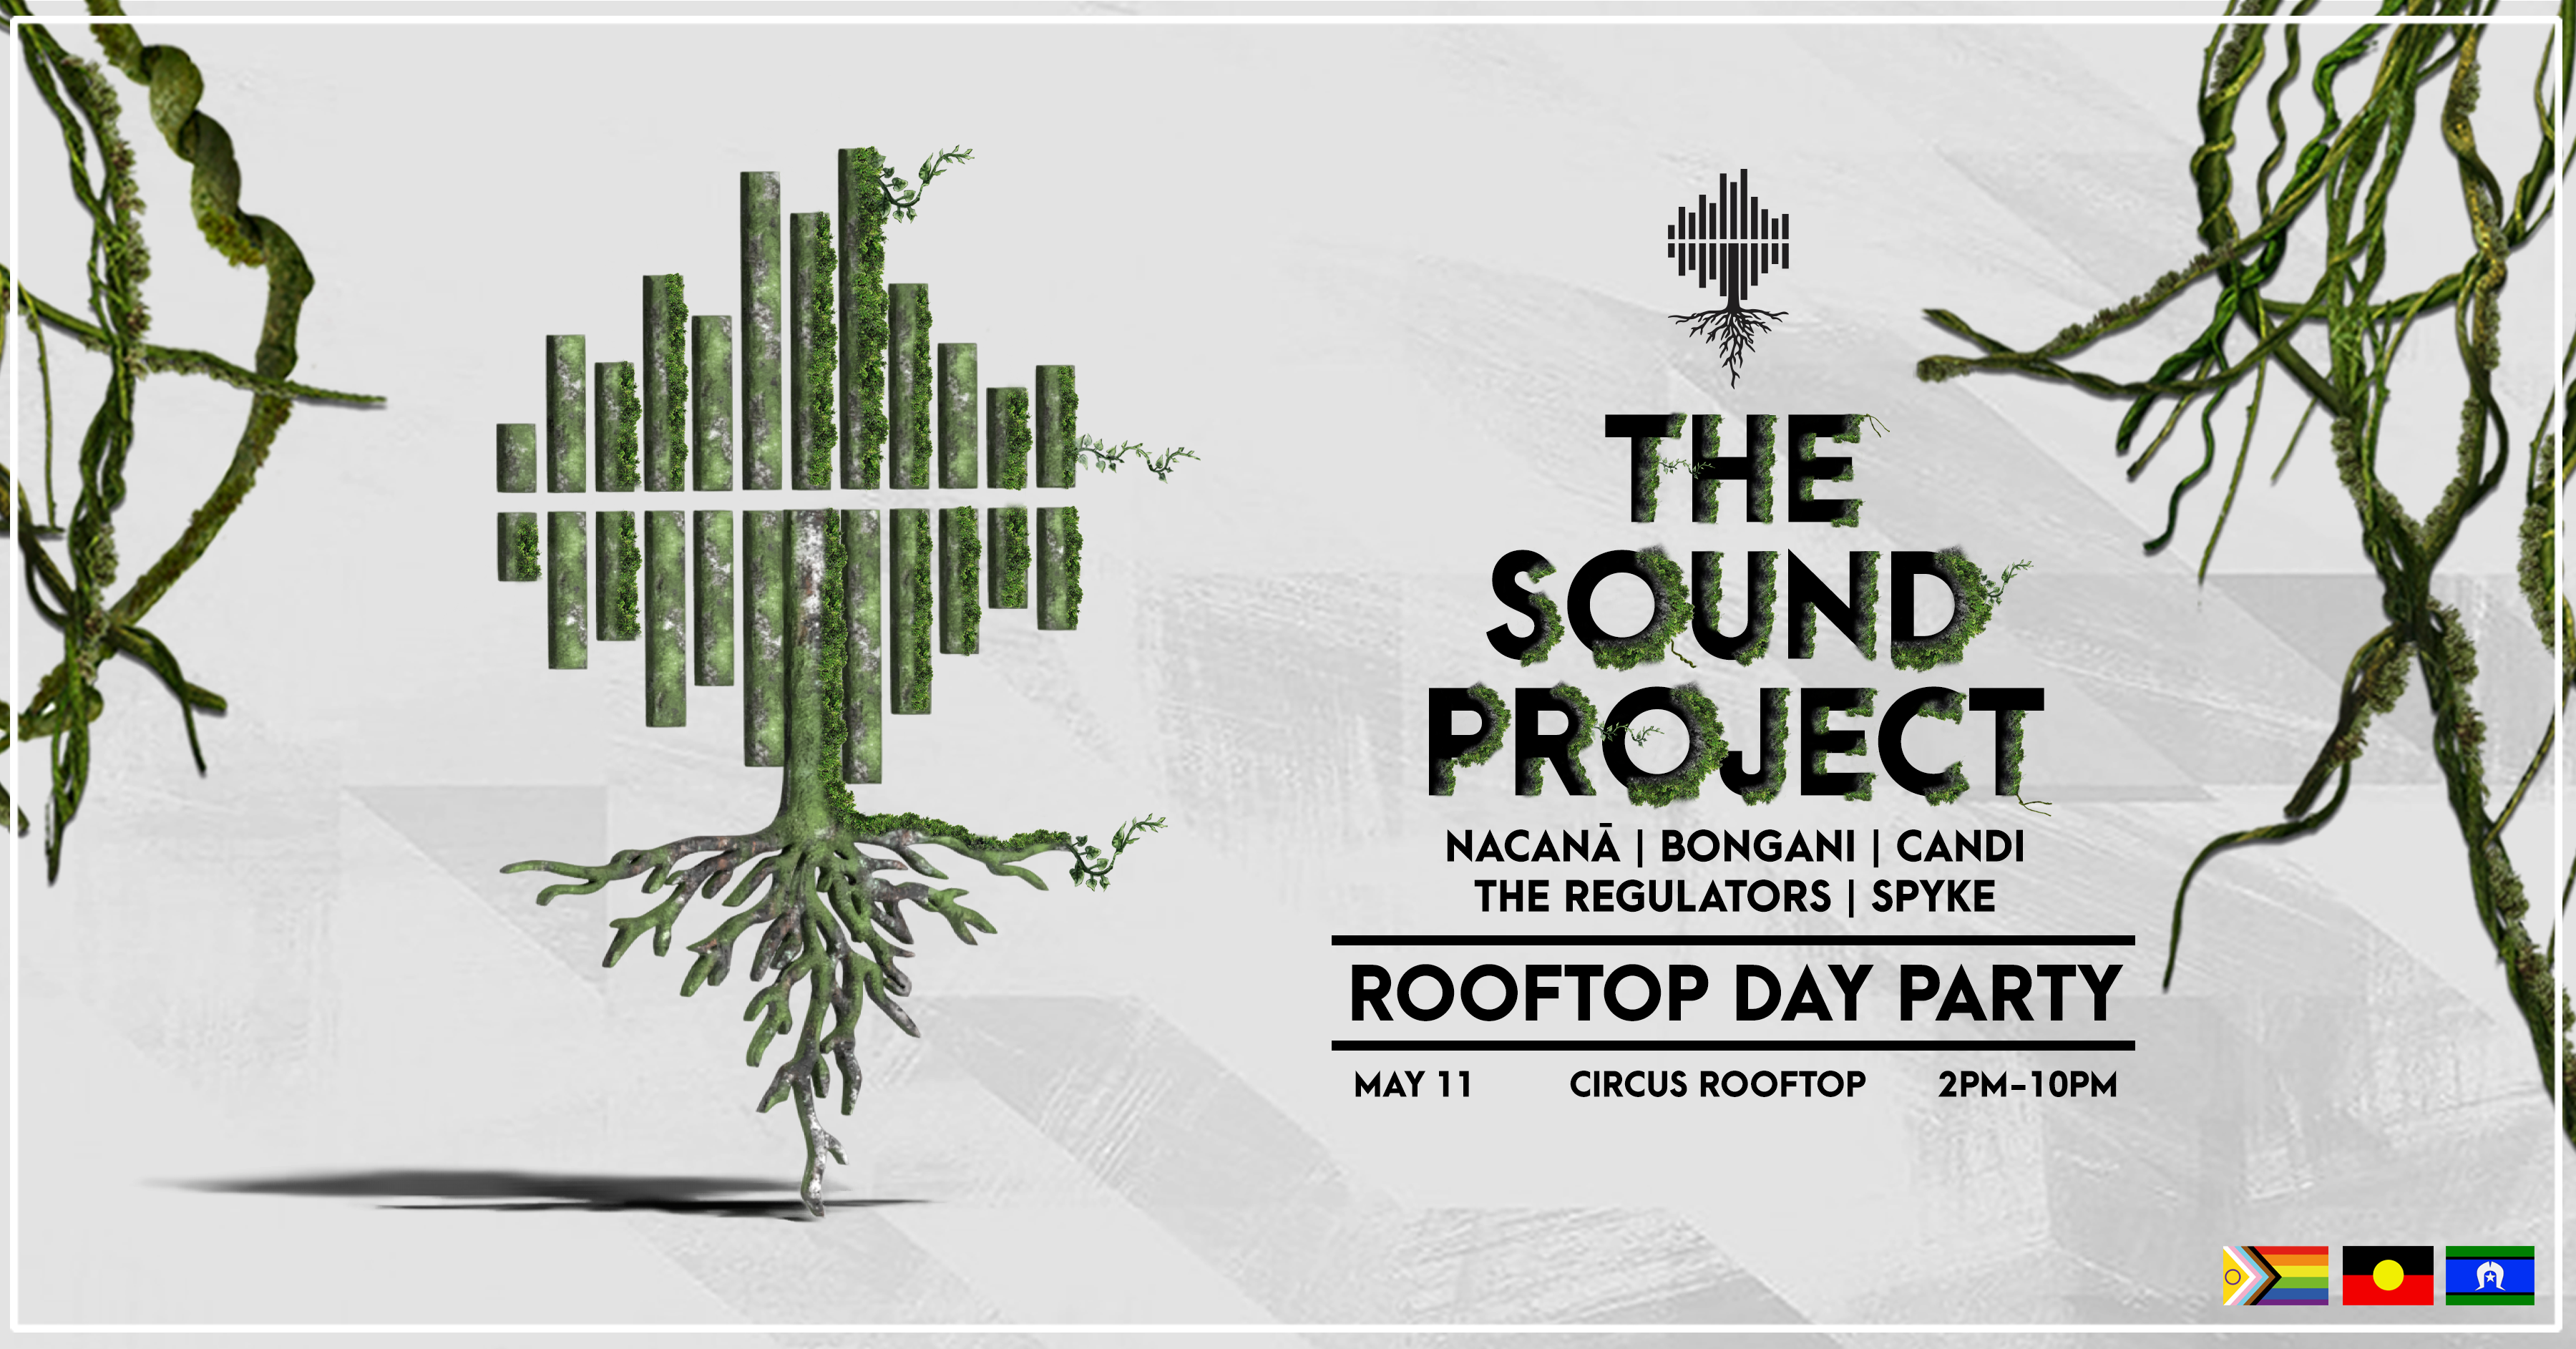 The Sound Project - Rooftop Day Party - フライヤー表